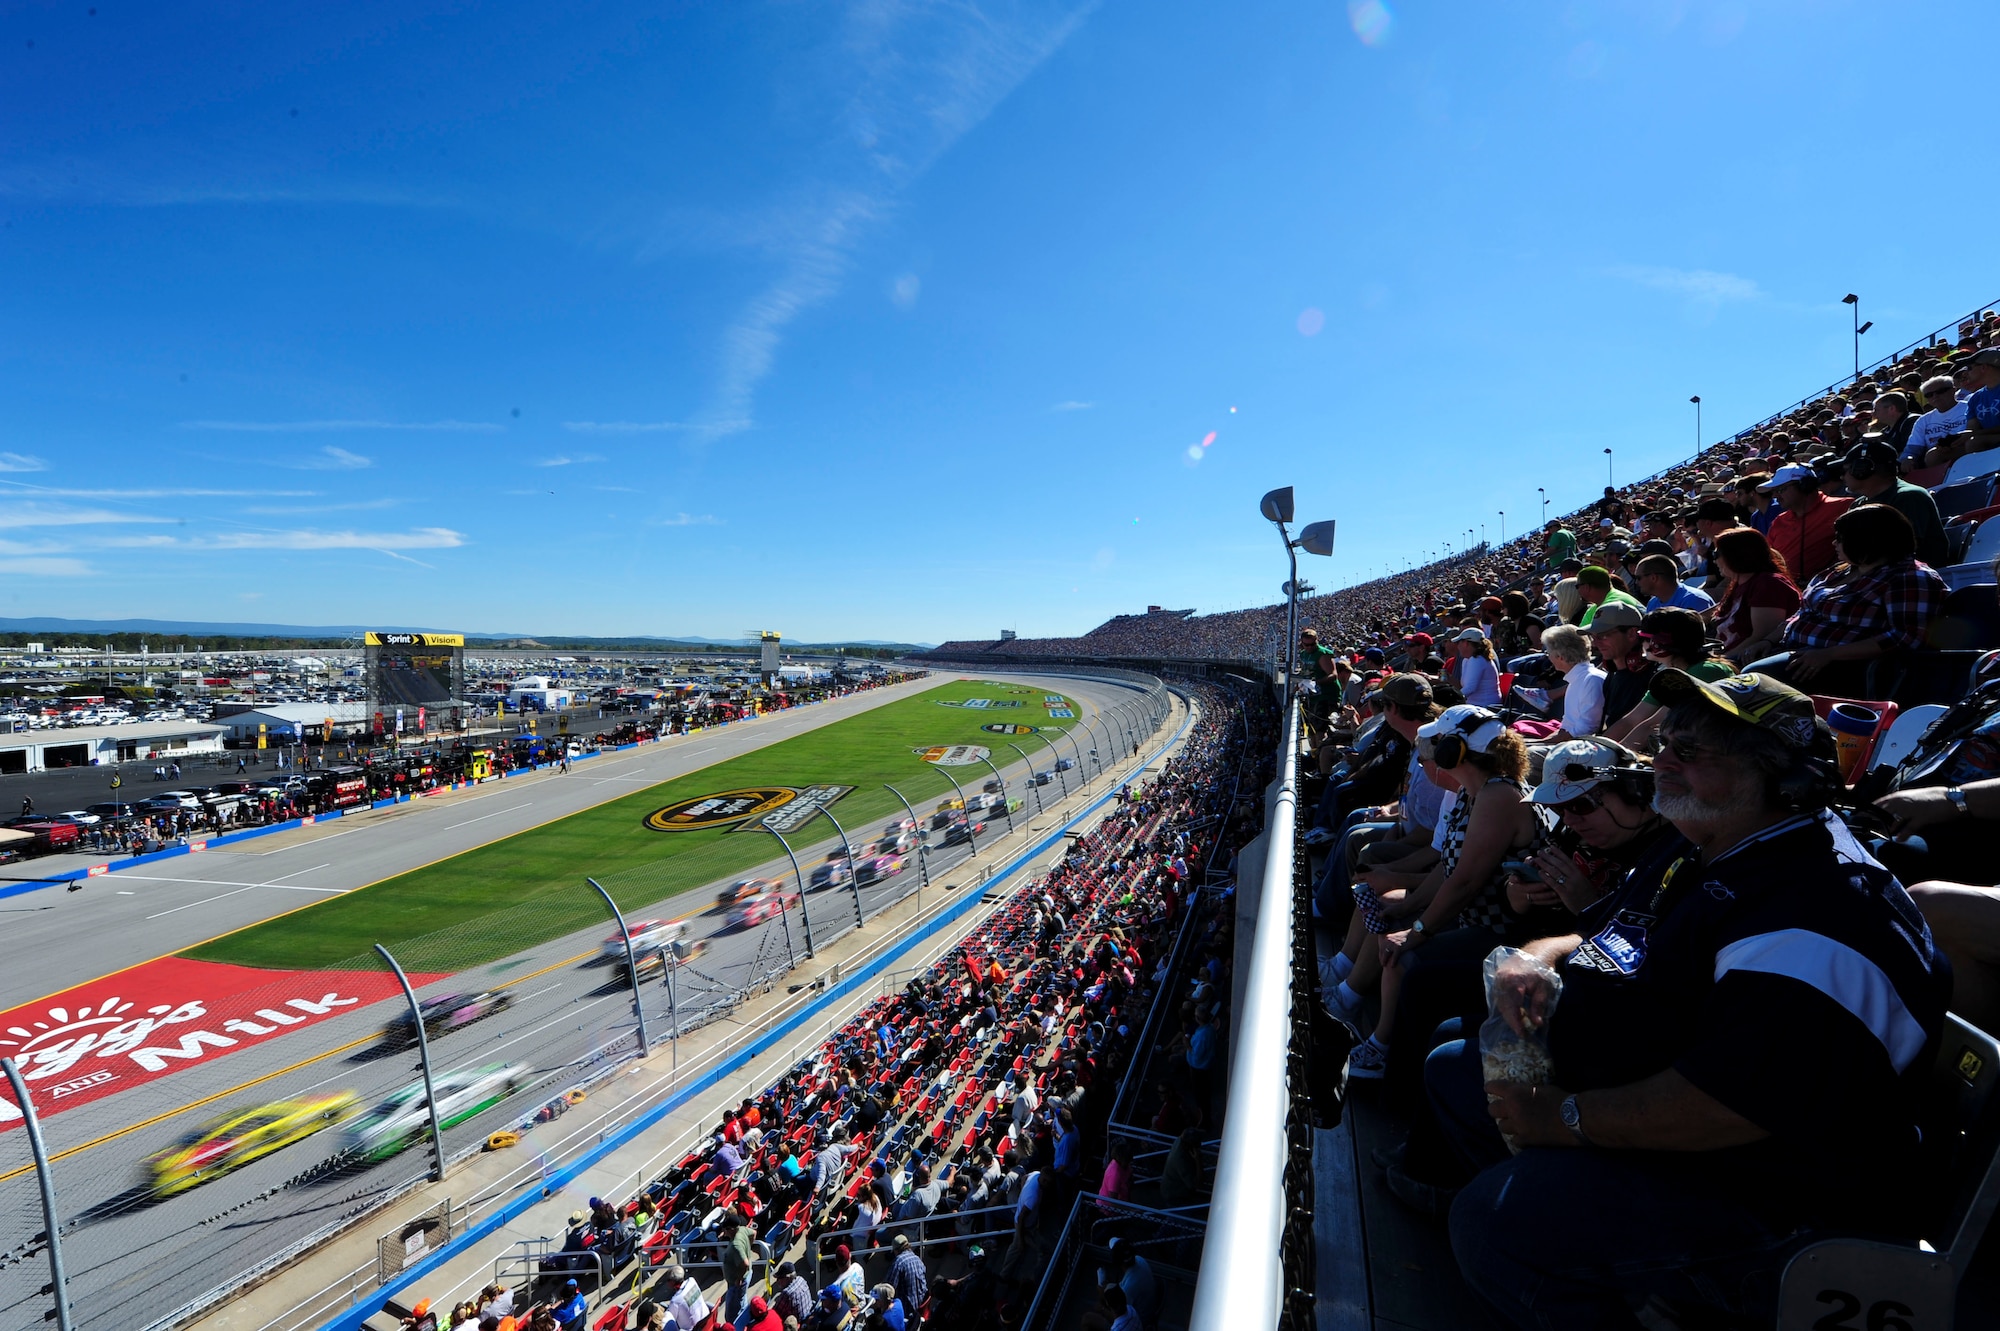 The crowd watches as the cars speed by during the Geico 500 race at the Talladega Superspeedway in Talladega, Ala., Oct. 10, 2014. The Talladega Superspeedway is arguably NASCAR’s most competitive race. (U.S. Air Force photo by Airman 1st Class Alexa Culbert)